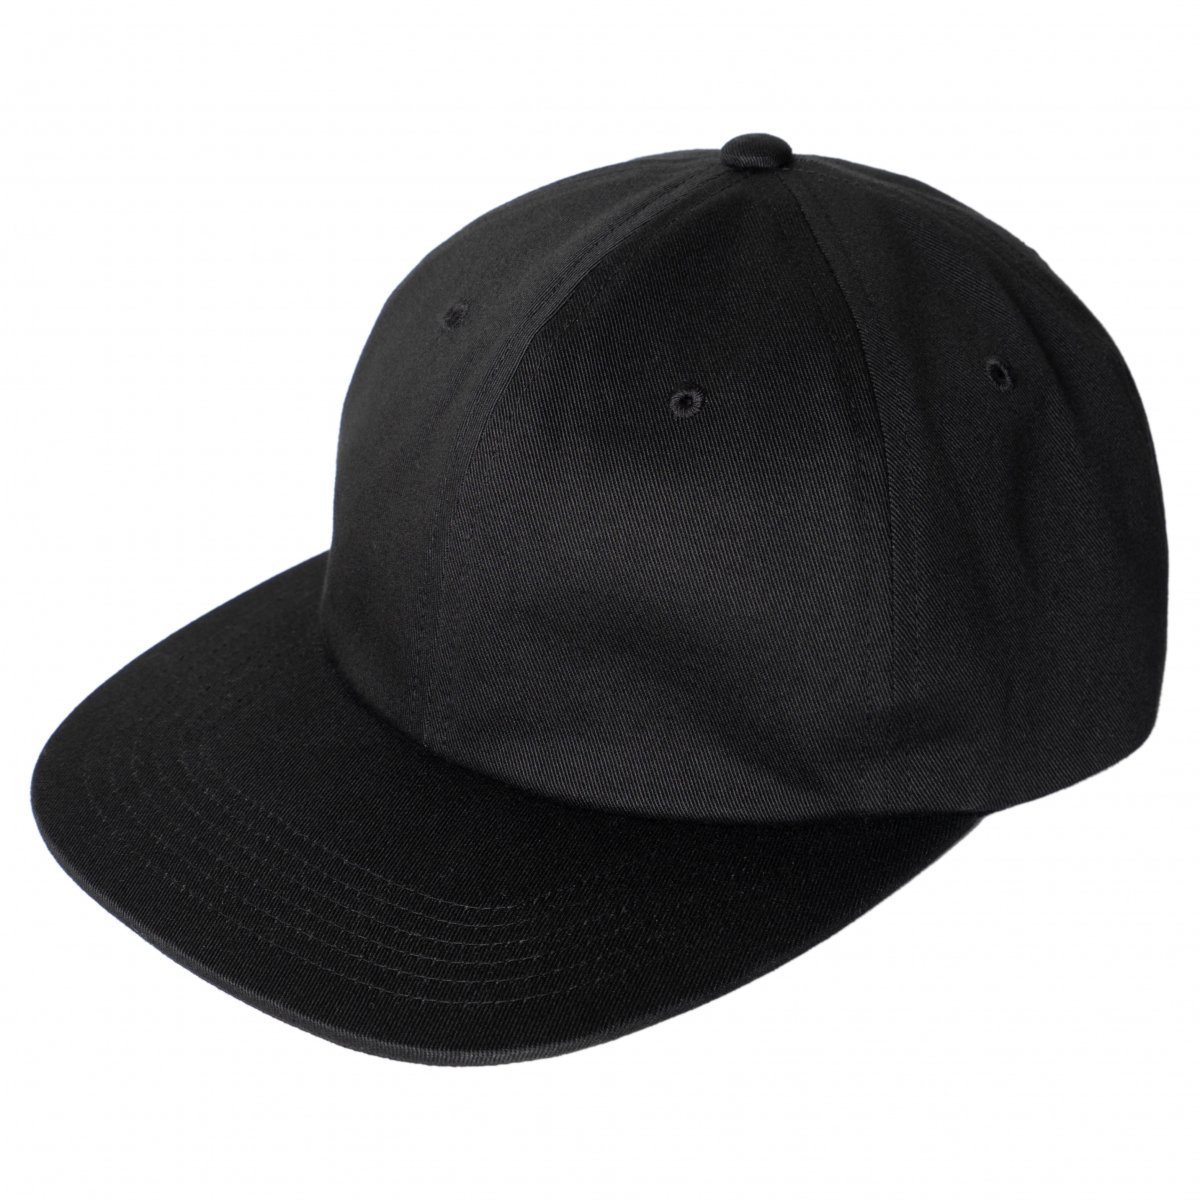 Cotton Twill 6 Panel - Black - CUP AND CONE WEB STORE